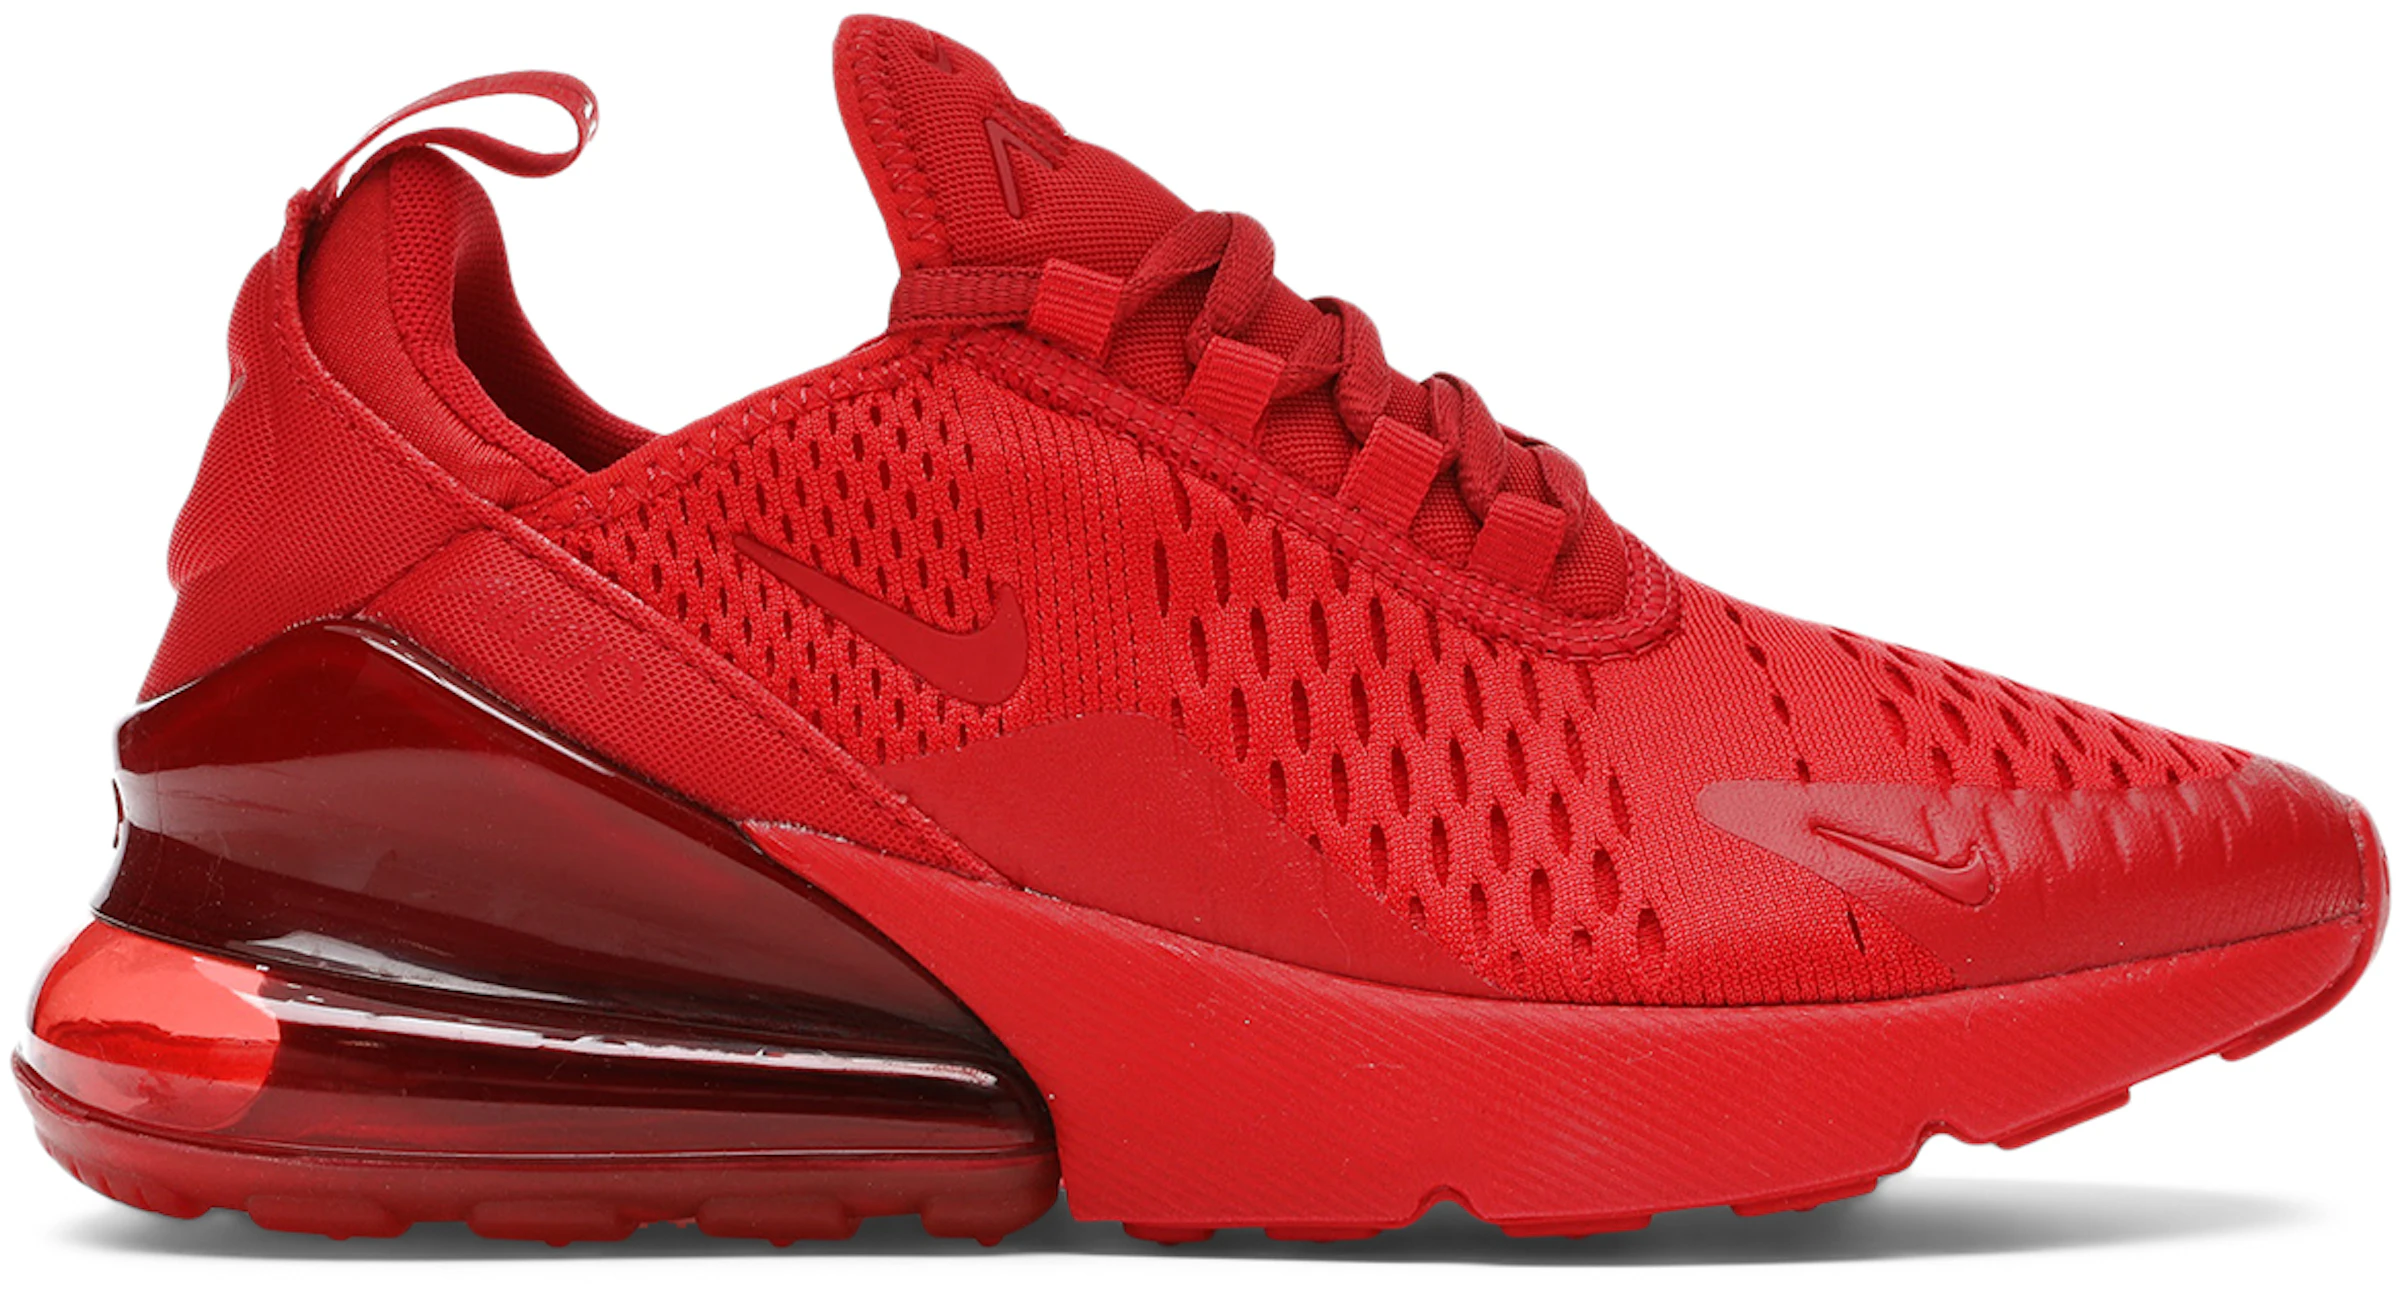 Toegepast barrière Centimeter Nike Air Max 270 University Red (GS) - CW6987-600 - US